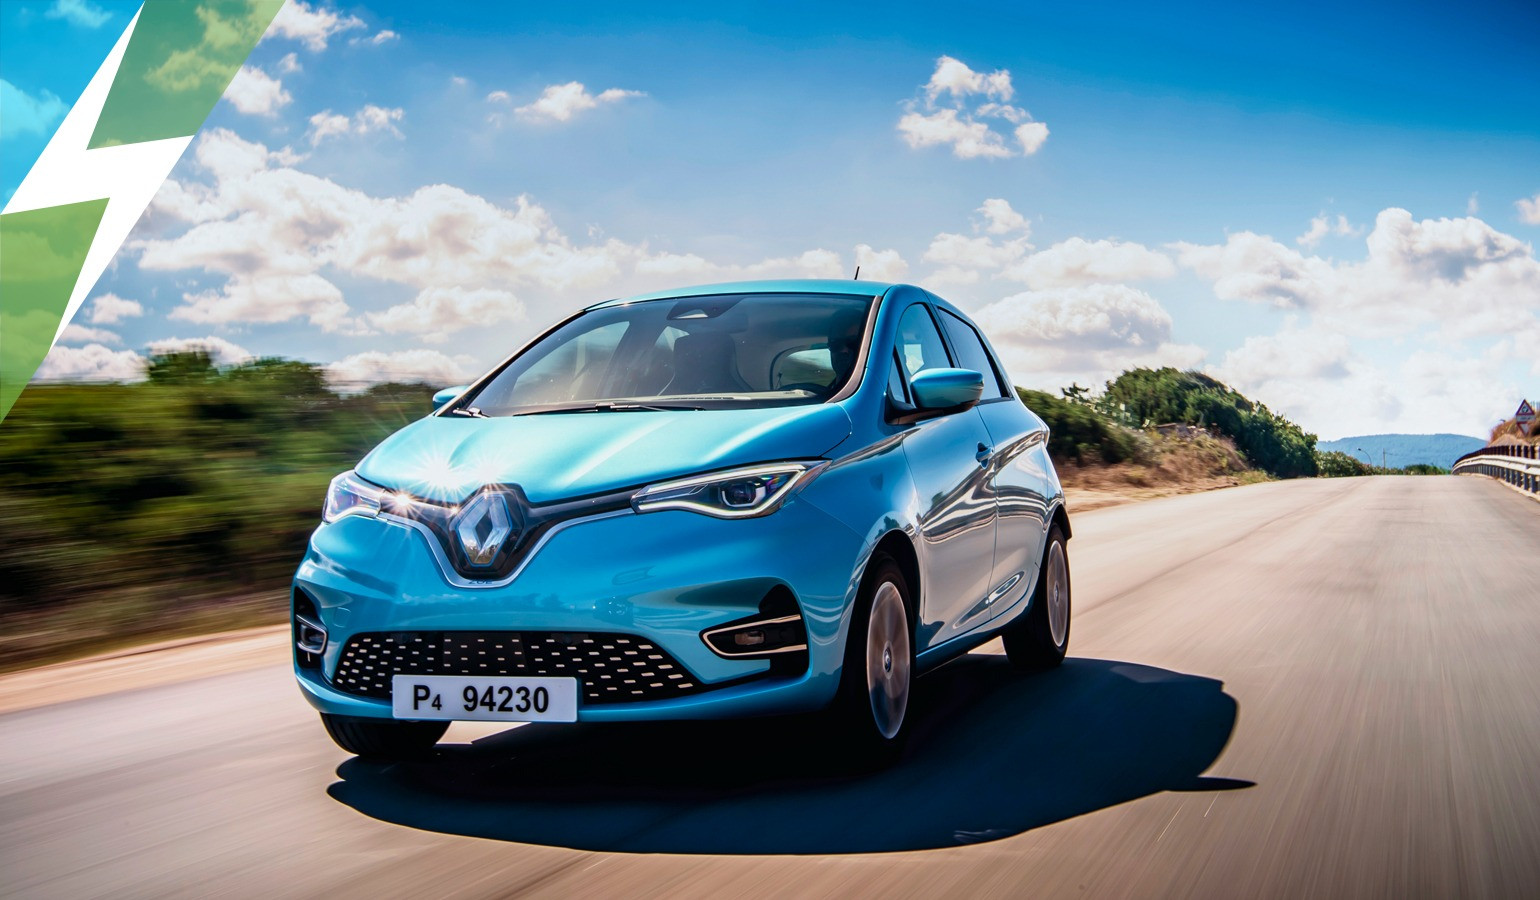 The Renault Zoe has been on sale since 2012